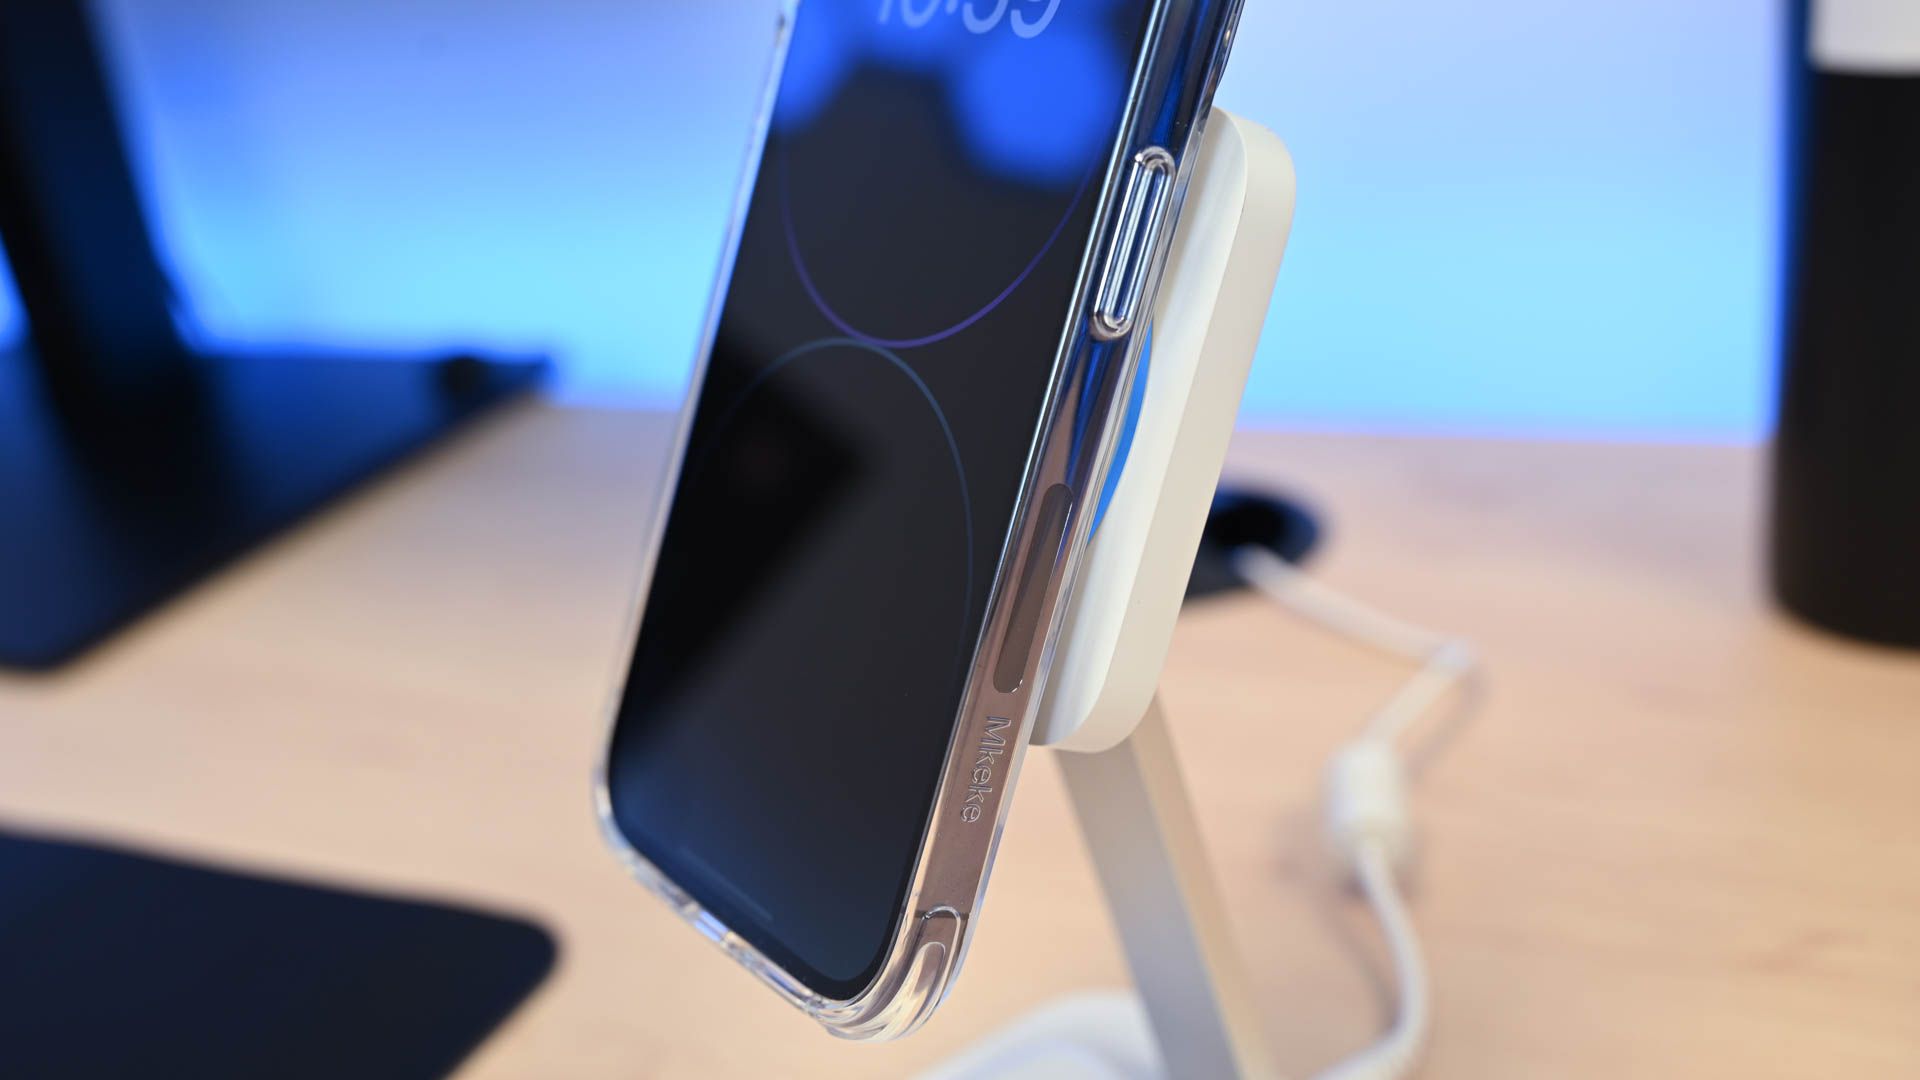 ESR HaloLock 2-in-1 Wireless Charger with CryoBoost blue light for iPhone